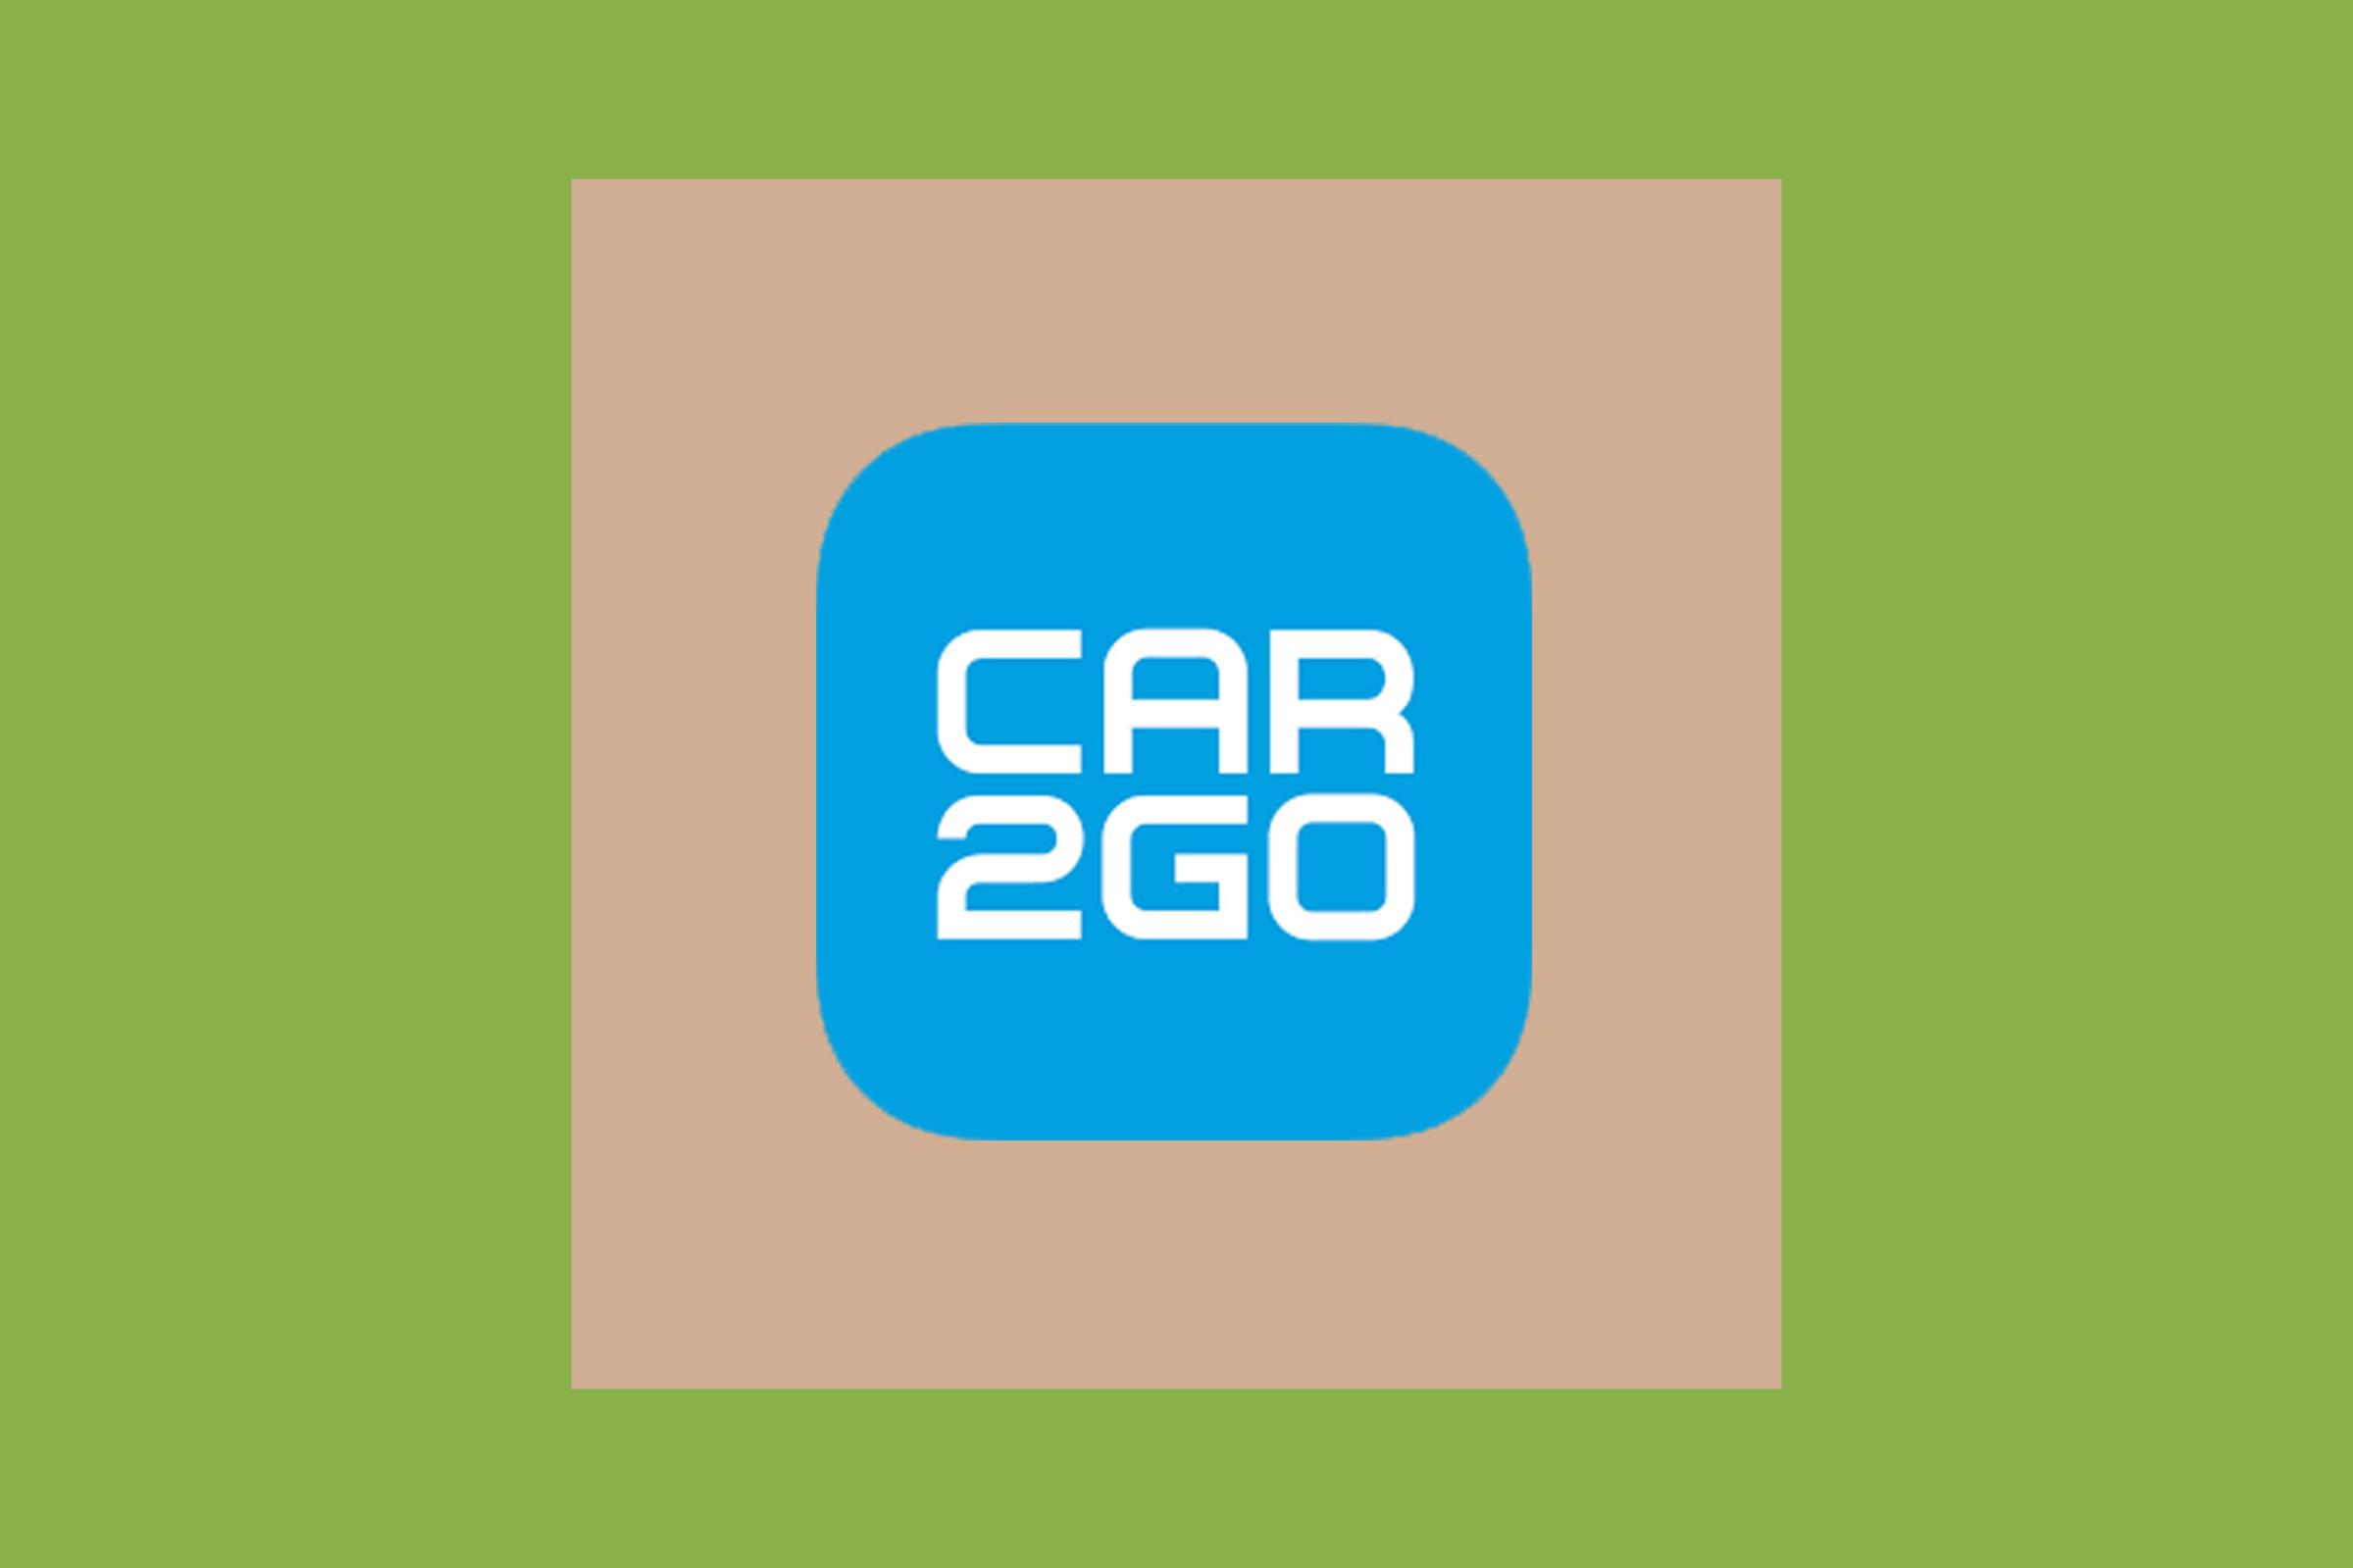 Car2go is one of the top 10 apps of 2017